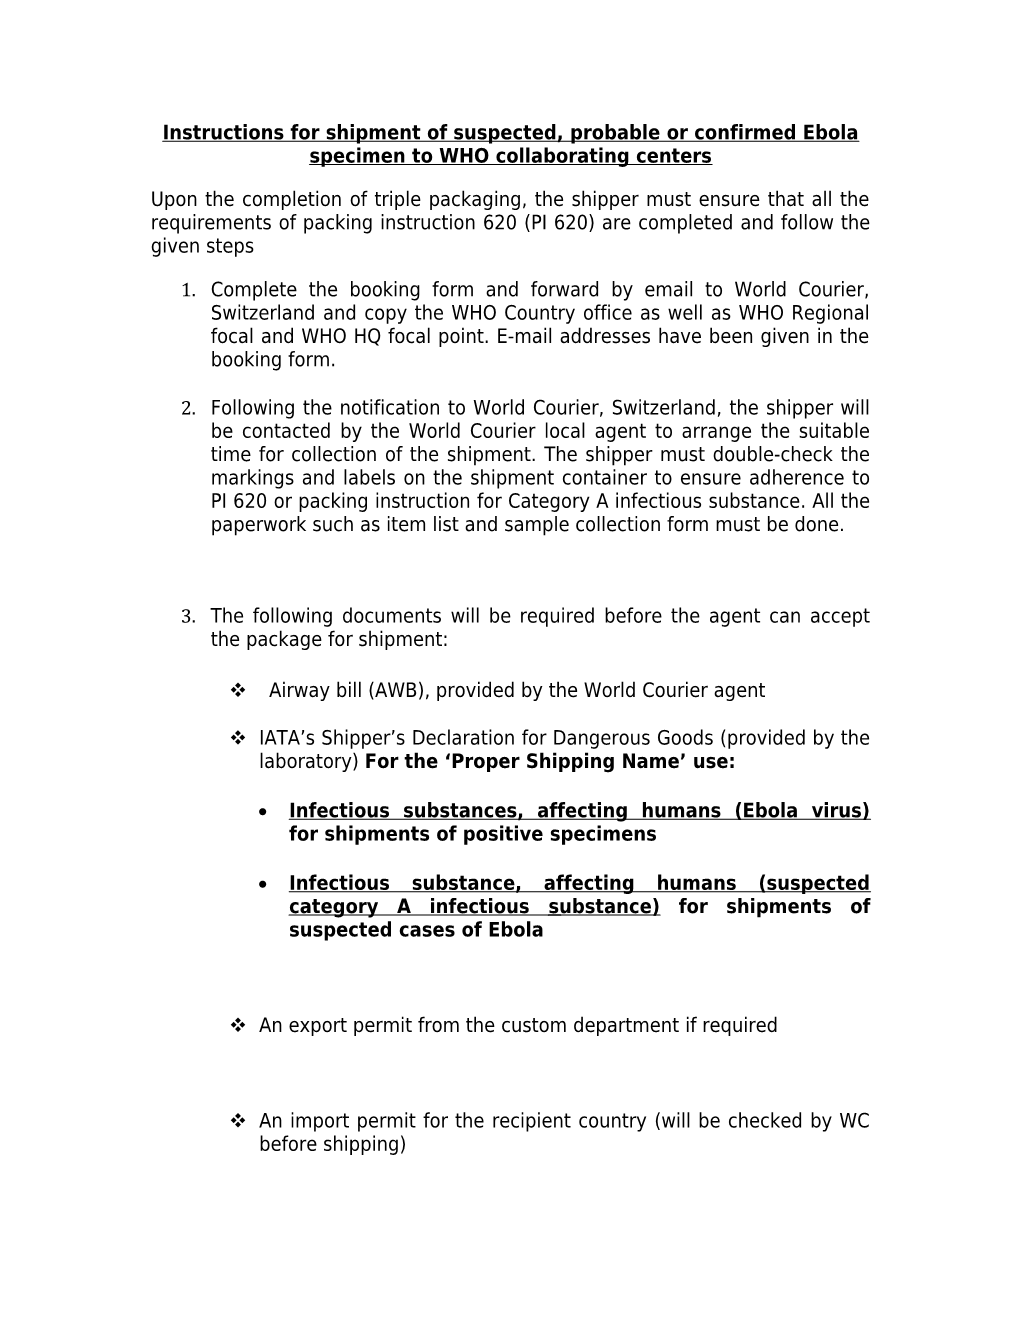 Instructions for Shipment of Suspected, Probable Or Confirmed Ebola Specimen to WHO